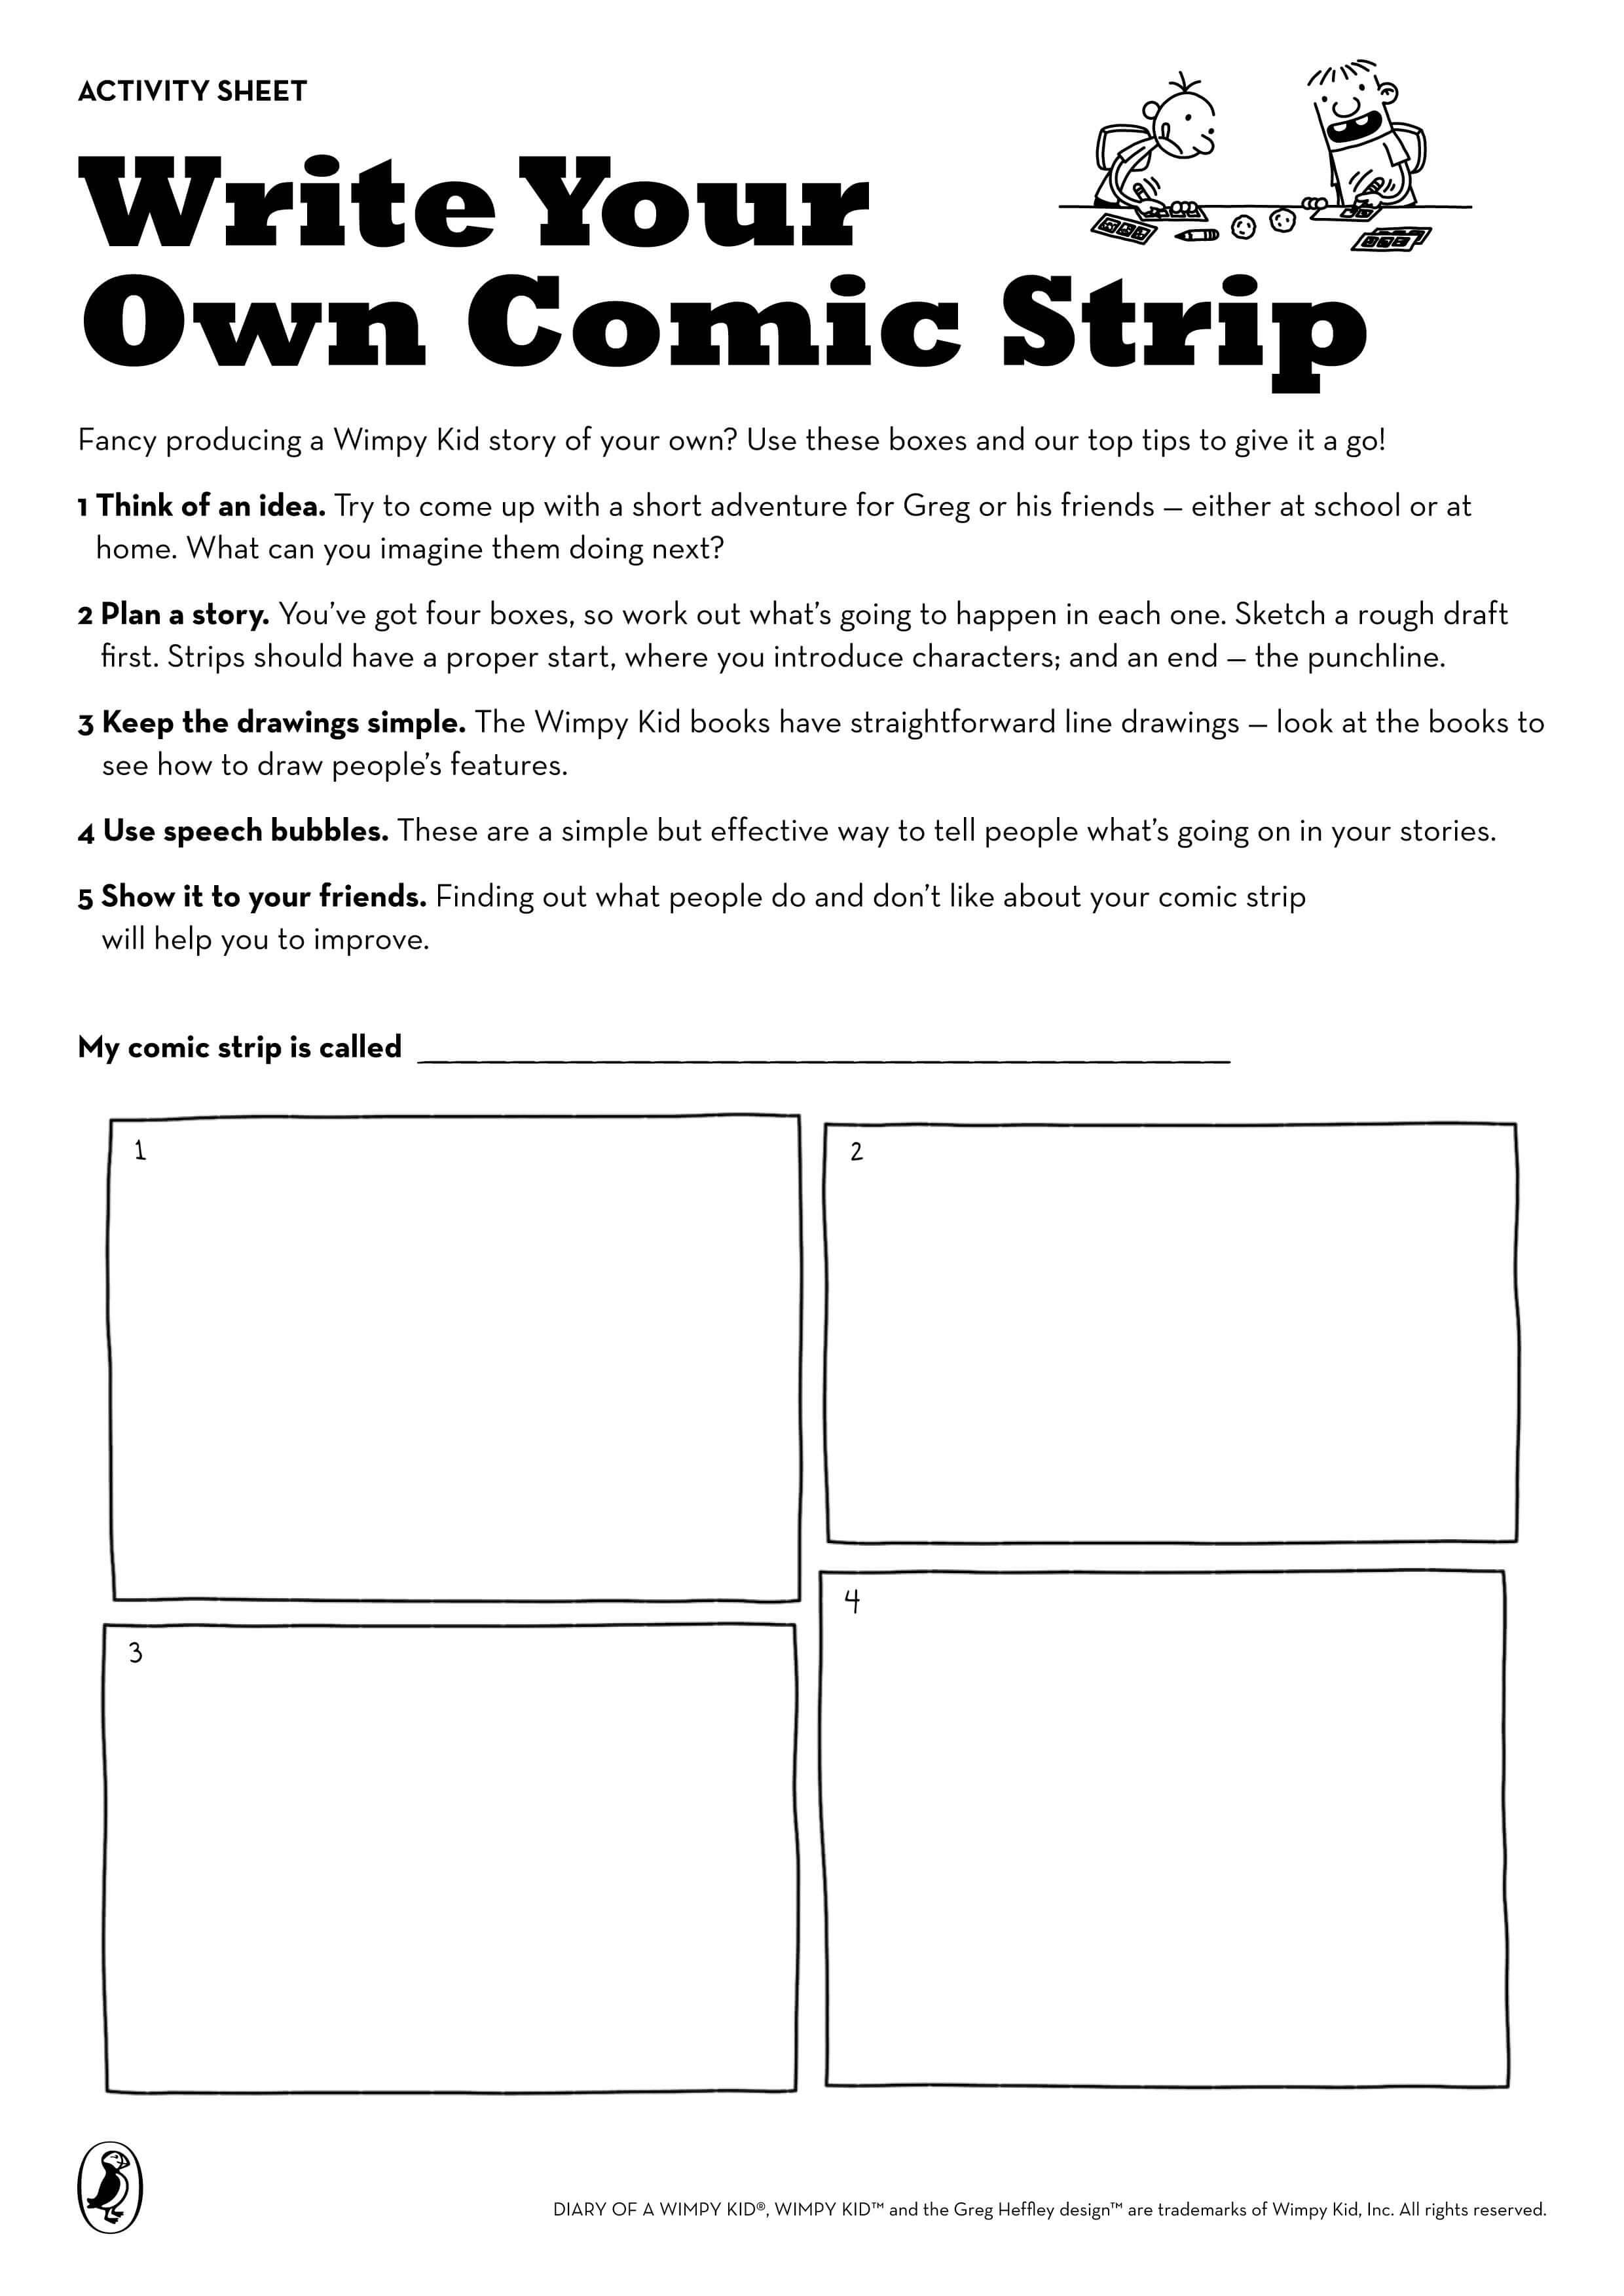 Write Your Own Comic Strip | Diary Of A Wimpy Kid Party Regarding Printable Blank Comic Strip Template For Kids